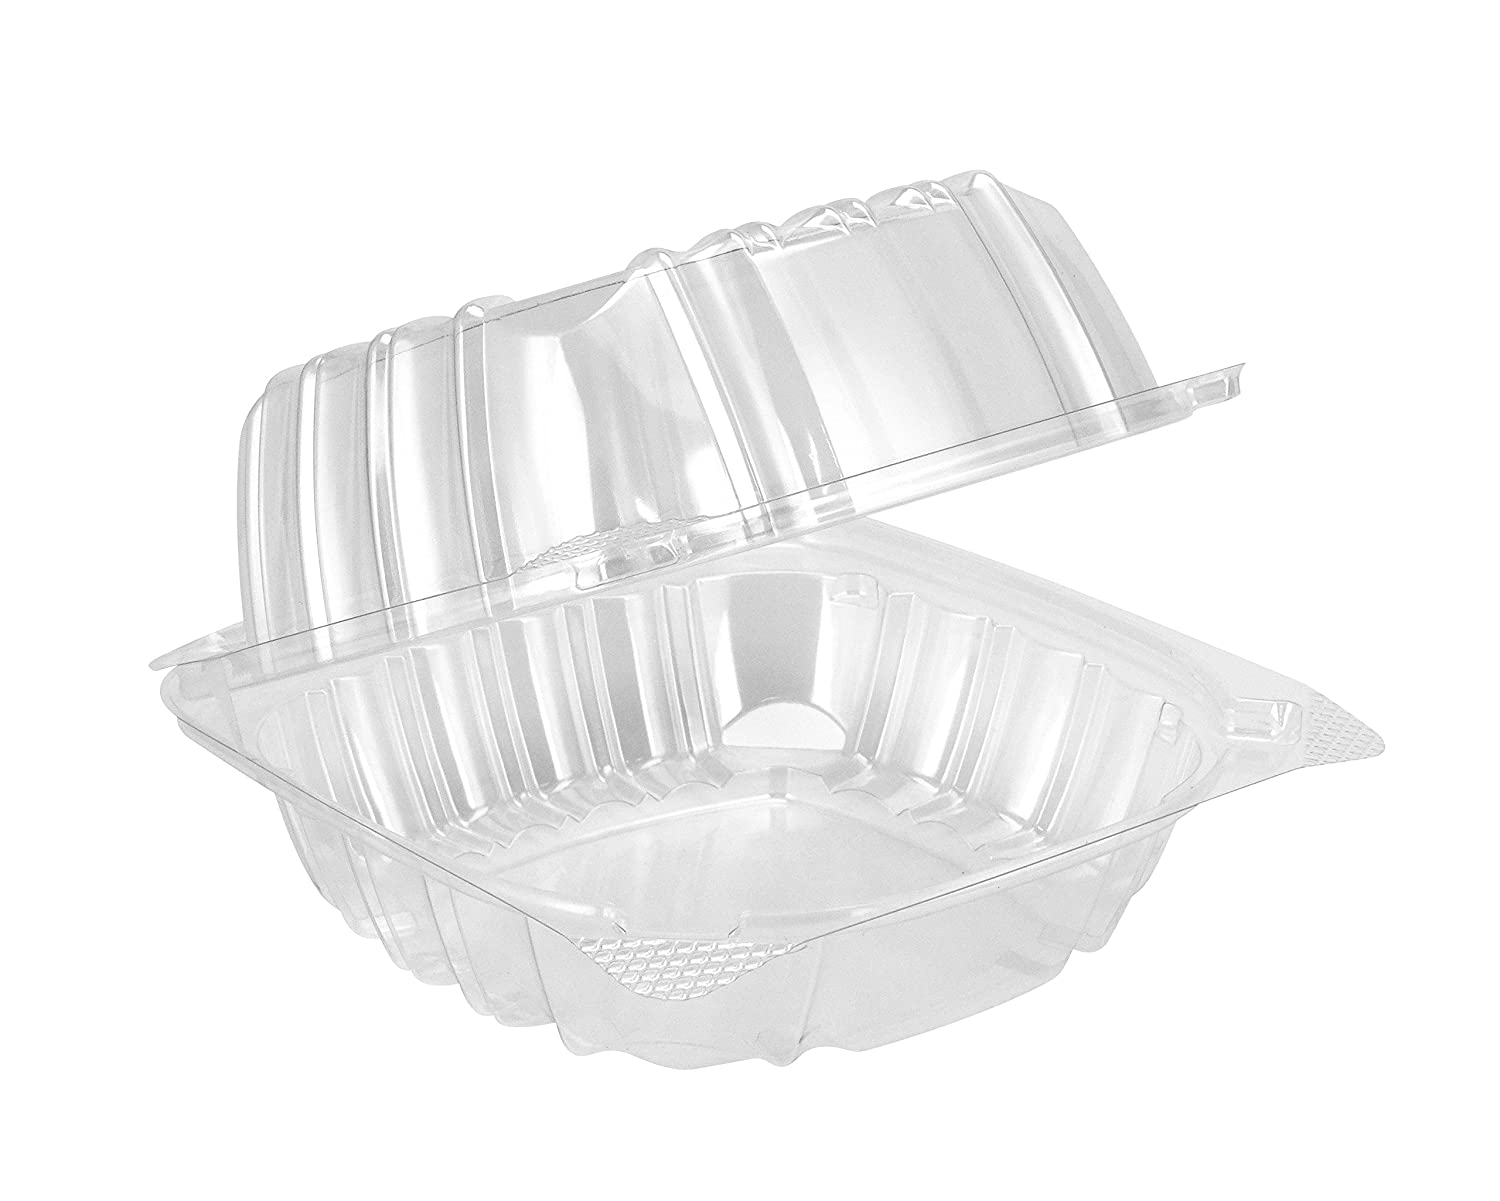 HQ Clear Hinged Clamshell 5.12'' x 5.12'' x 2.36'' mm Container - 400/Case